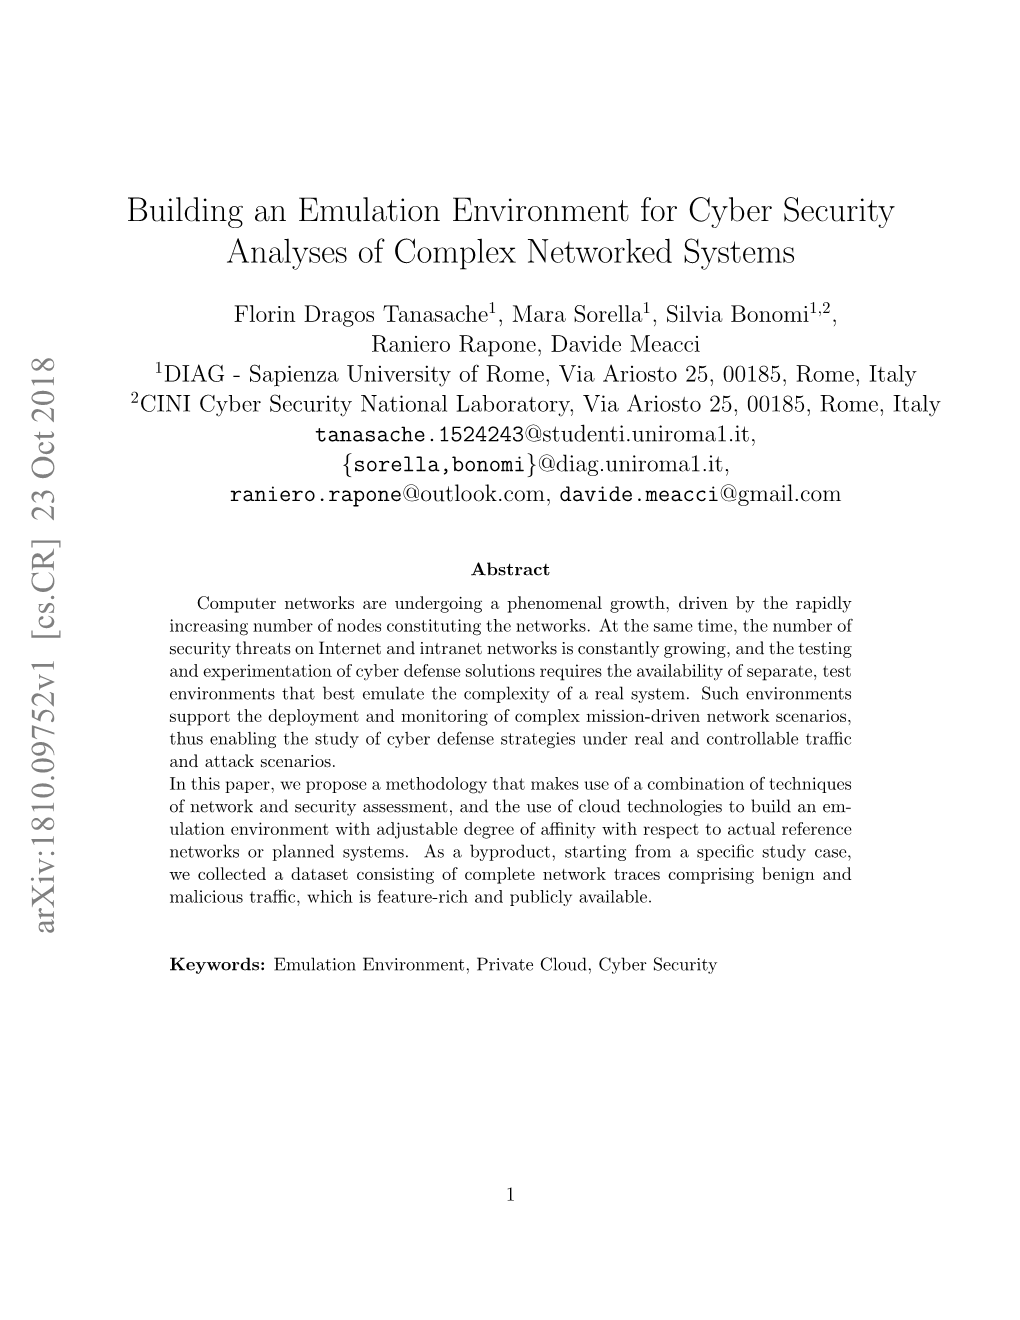 Building an Emulation Environment for Cyber Security Analyses of Complex Networked Systems